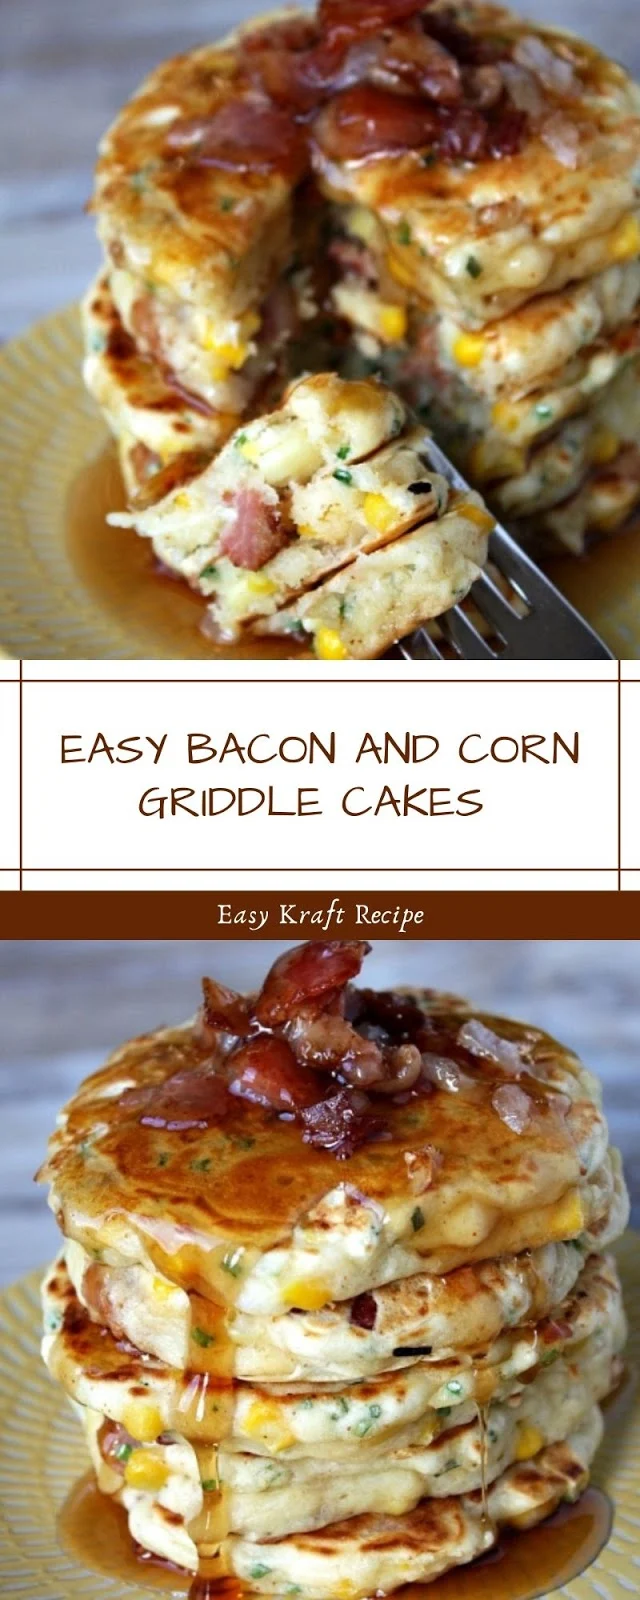 EASY BACON AND CORN GRIDDLE CAKES 